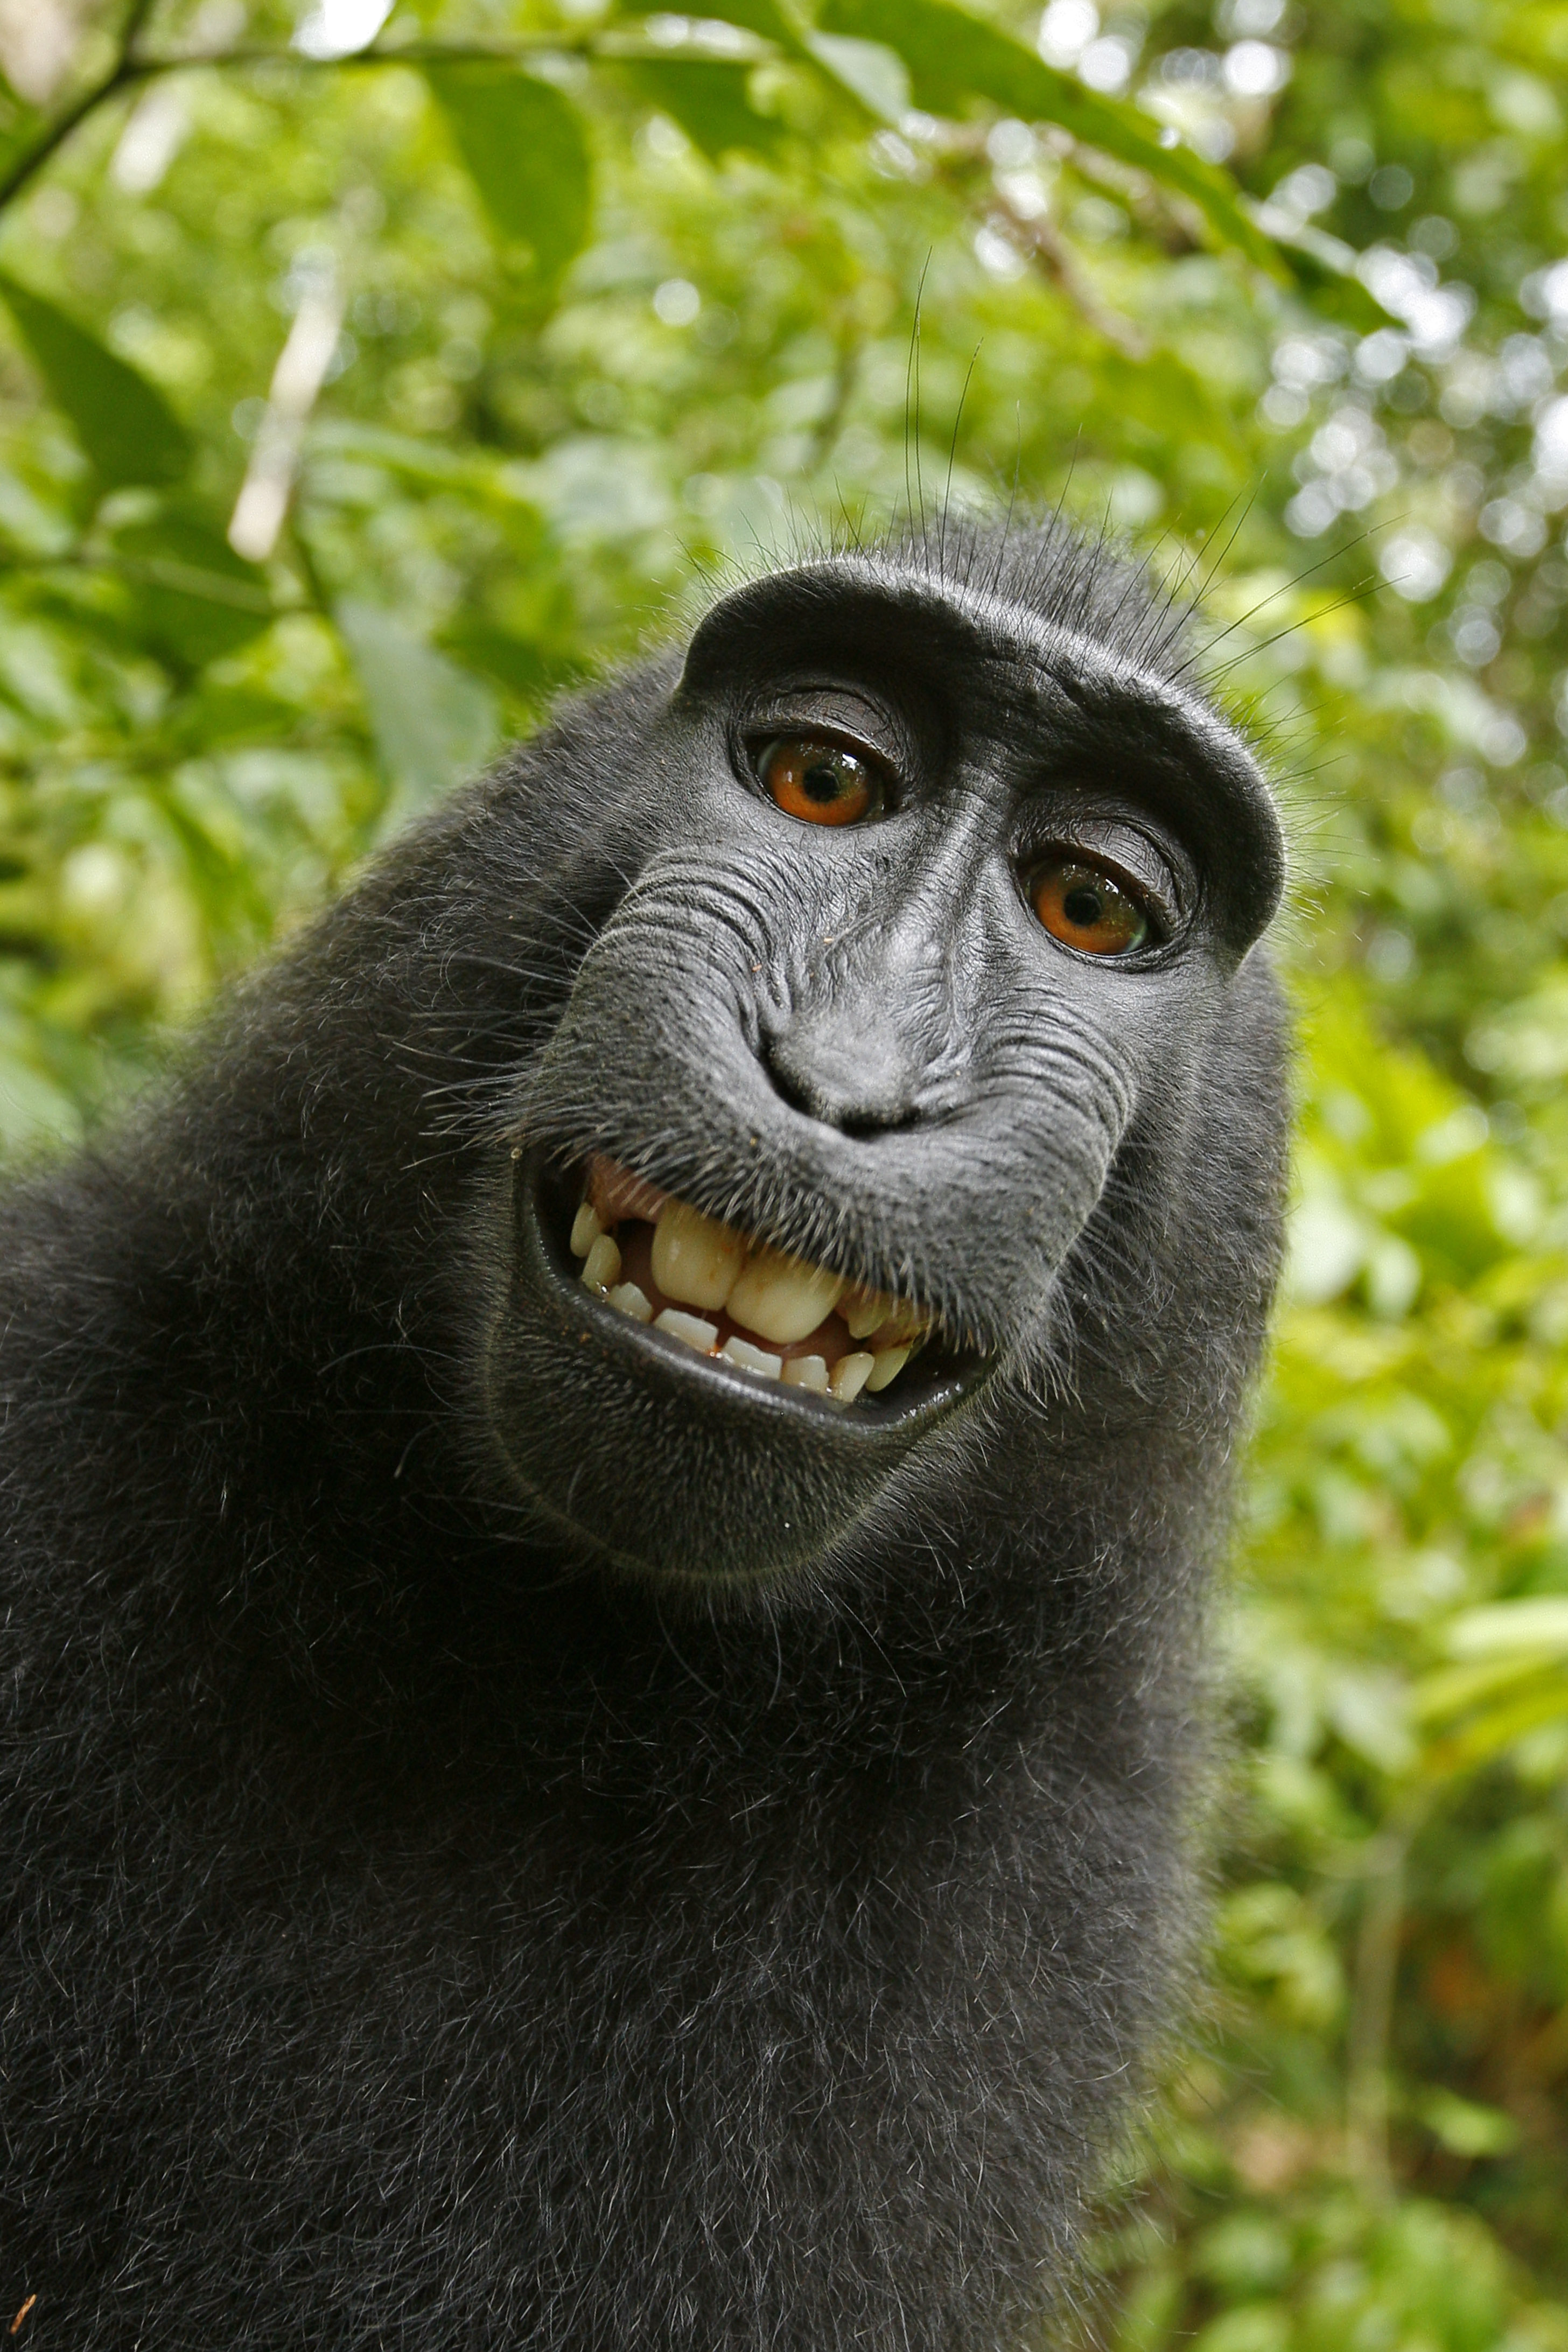 If a monkey takes a selfie, who owns the image?